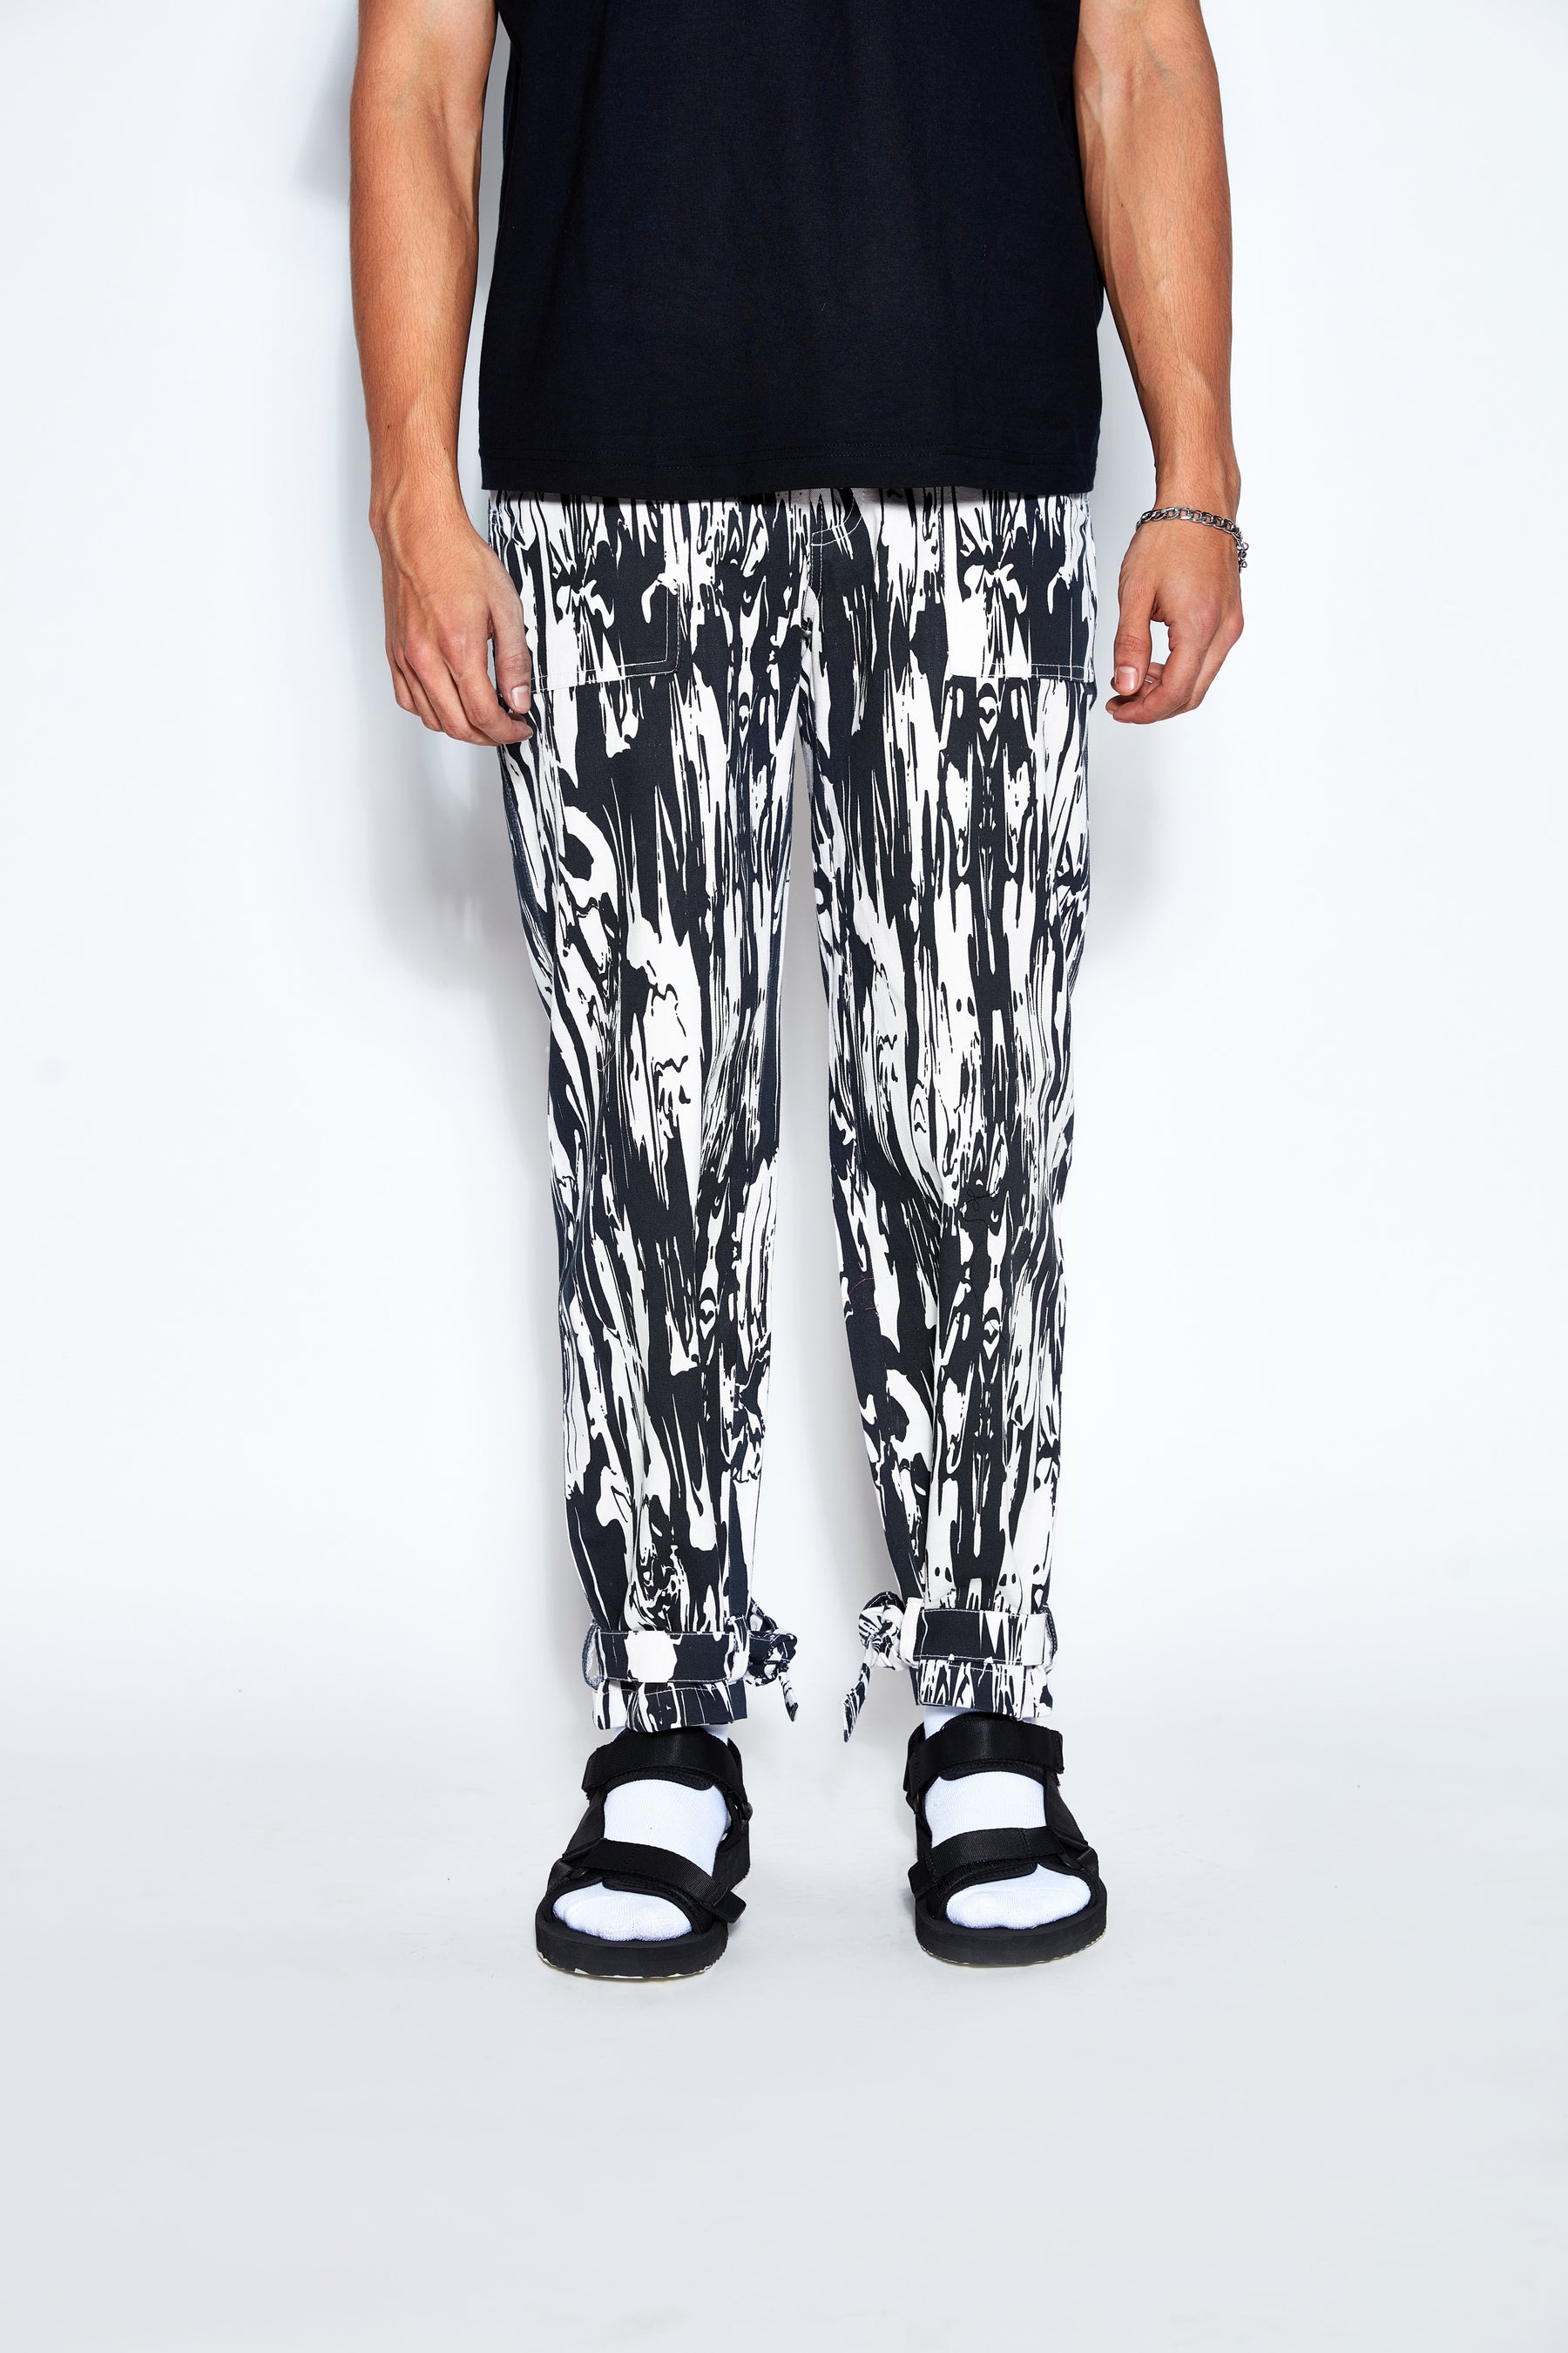 Abstract Print Unisex Twill Pants- White